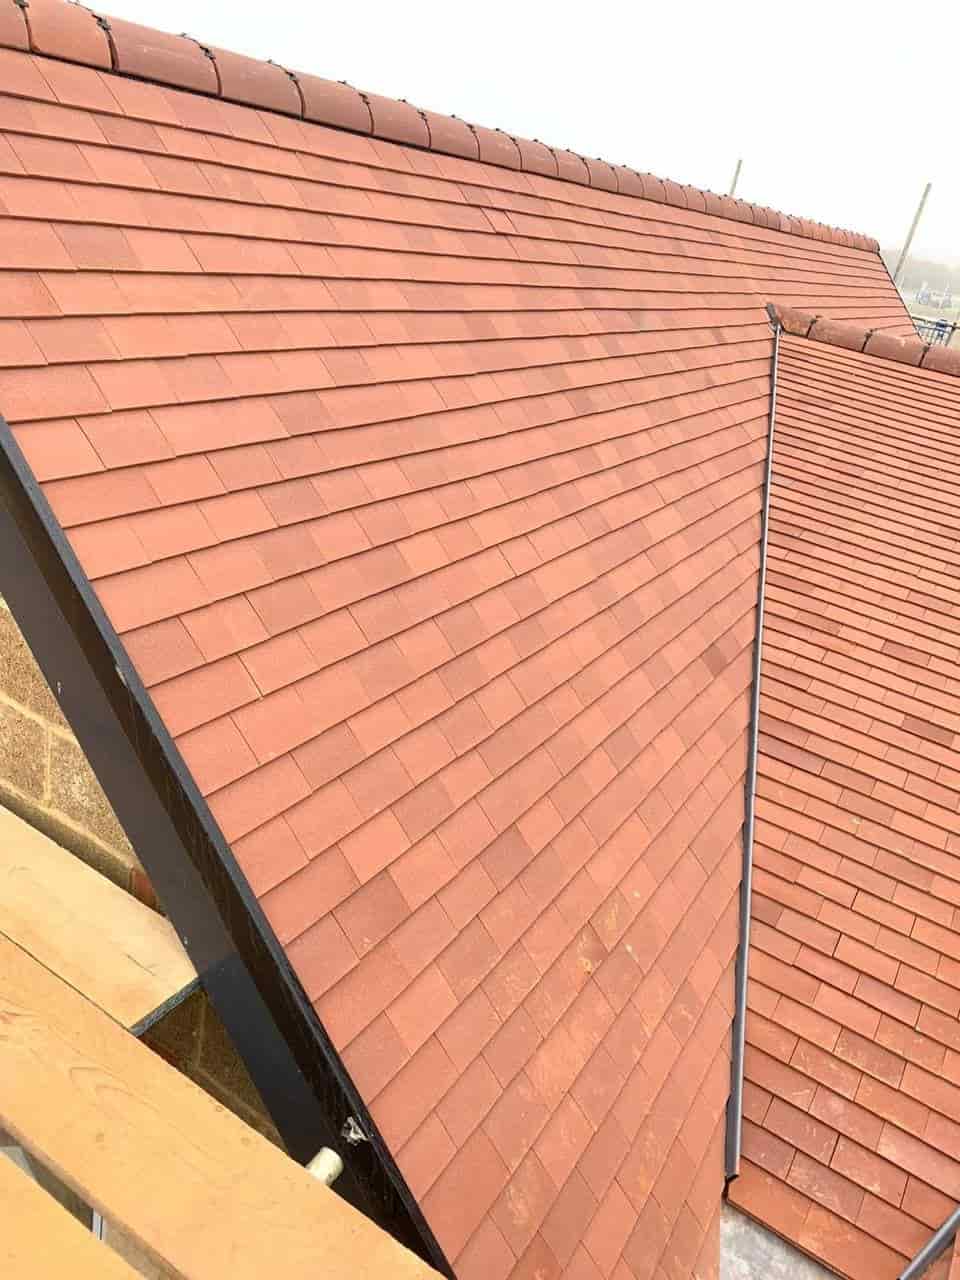 This is a photo of a new build roof installed in Eastbourne. Installed by Eastbourne Roofing Solutions